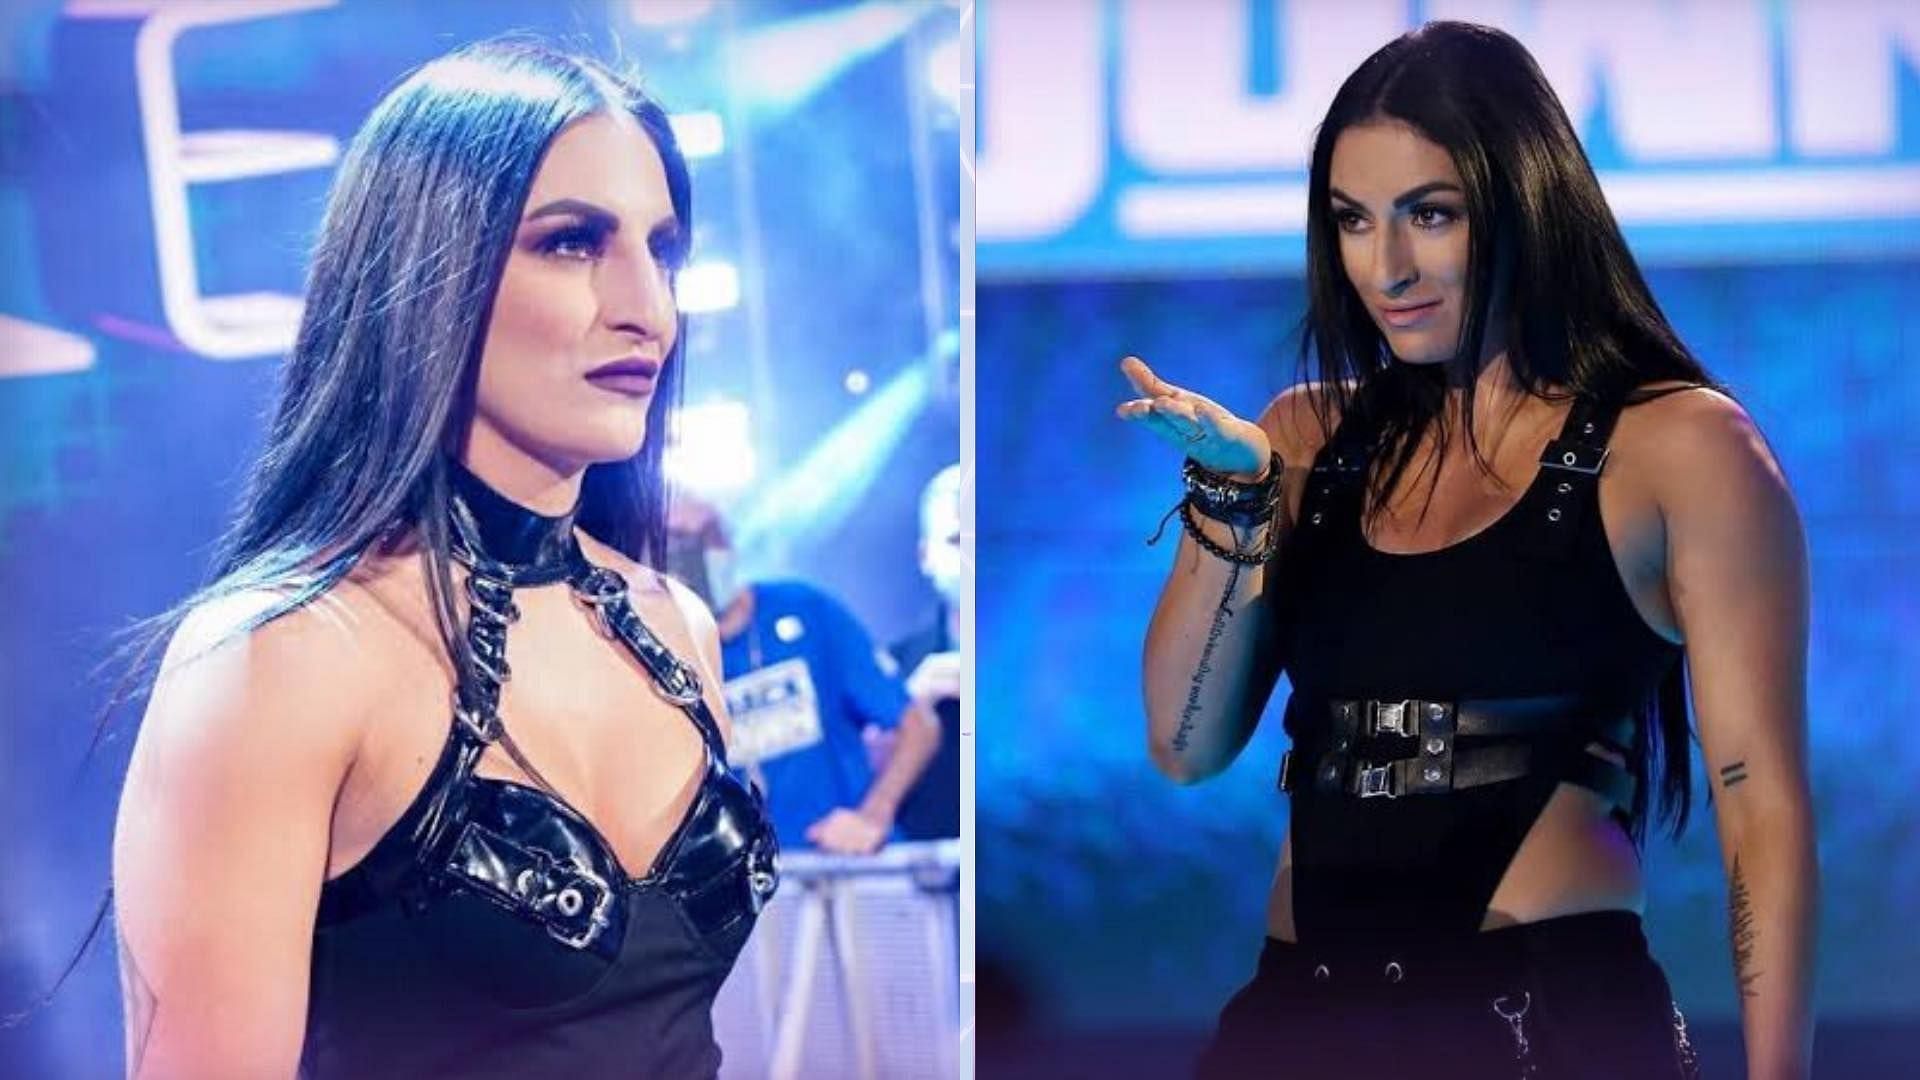 Sonya Deville is a former General Manager of WWE SmackDown.